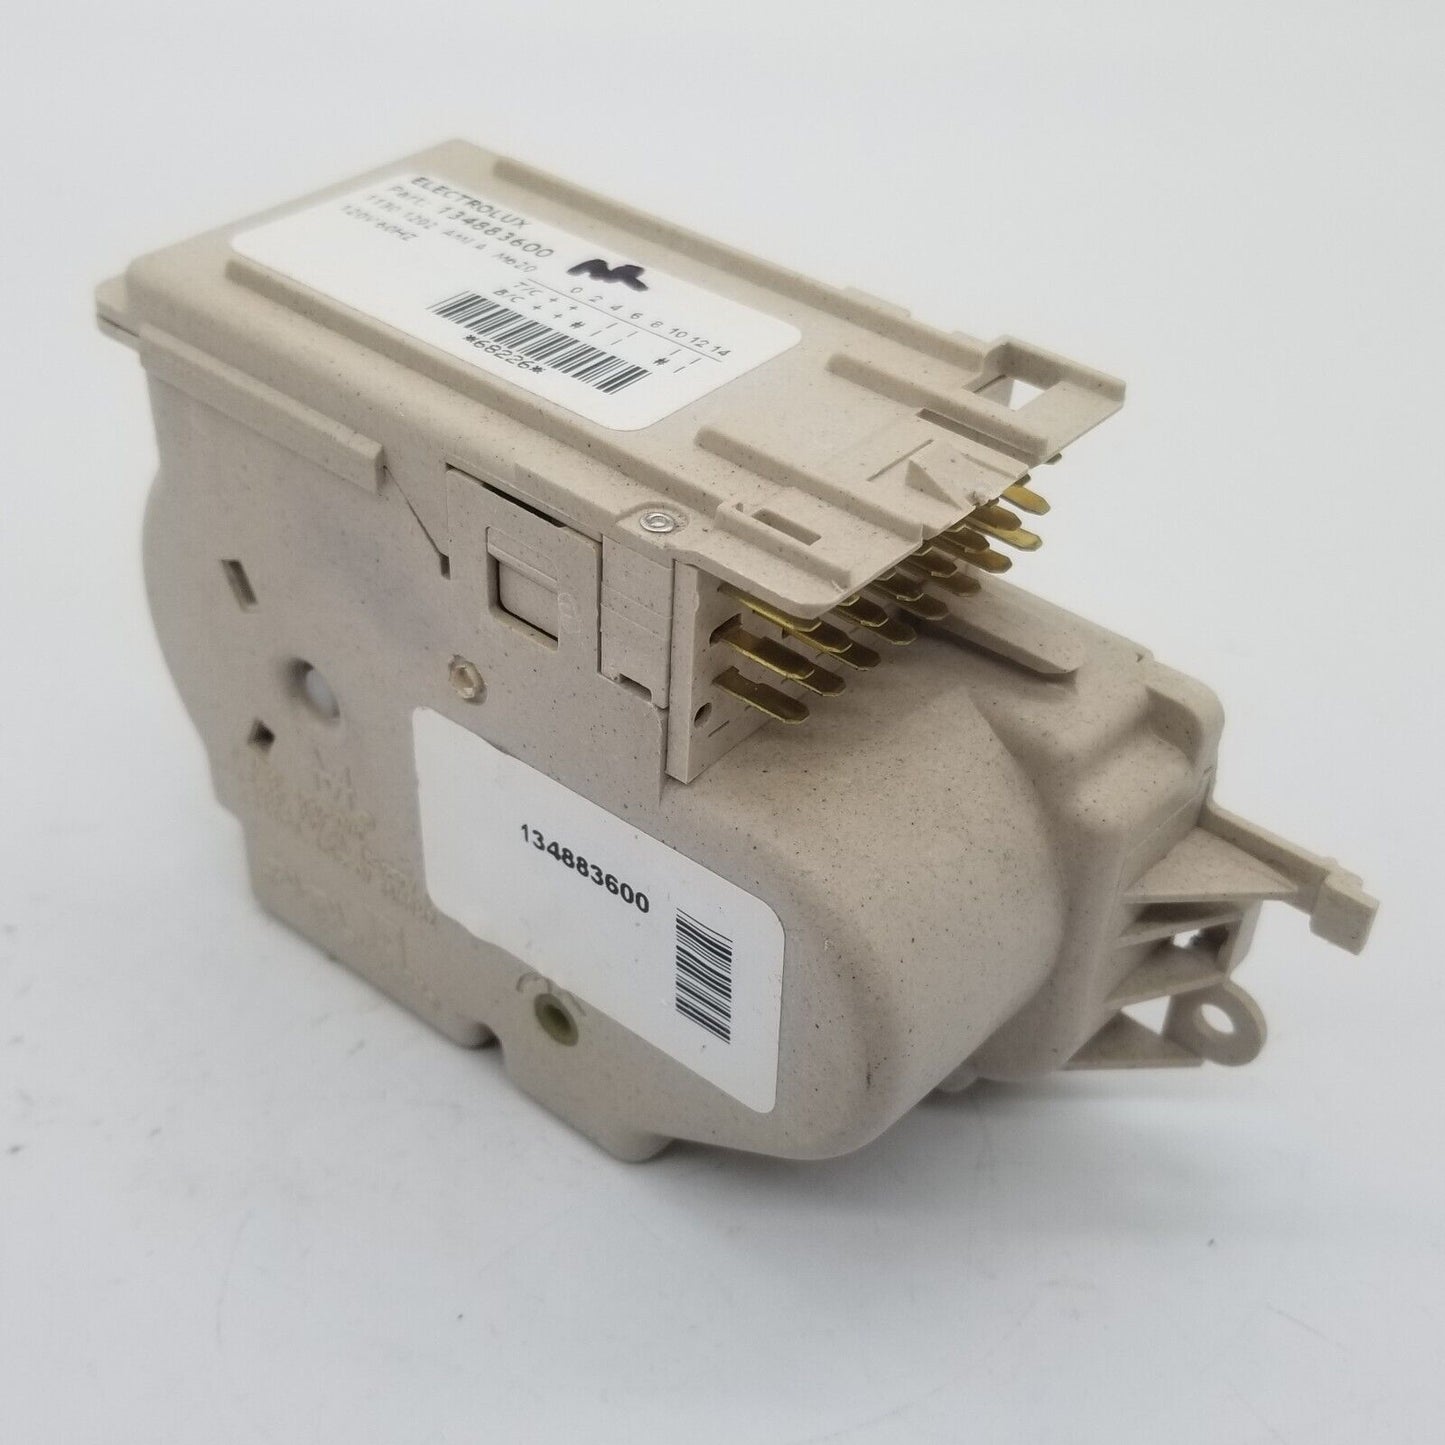 Genuine OEM Replacement for Frigidaire Washer Timer 134883600